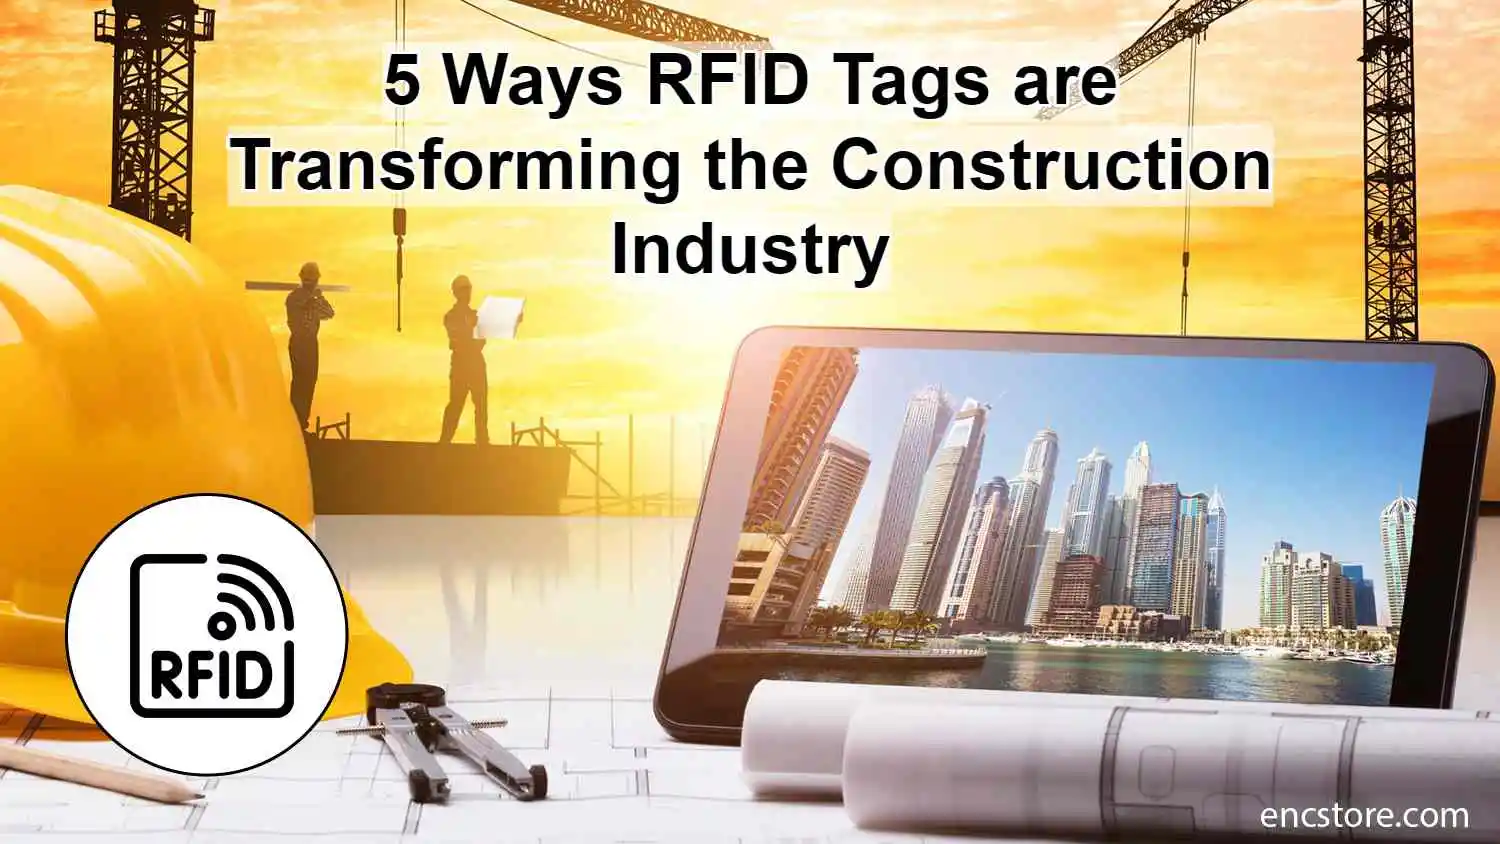 5 Ways RFID is Transforming the Construction Industry